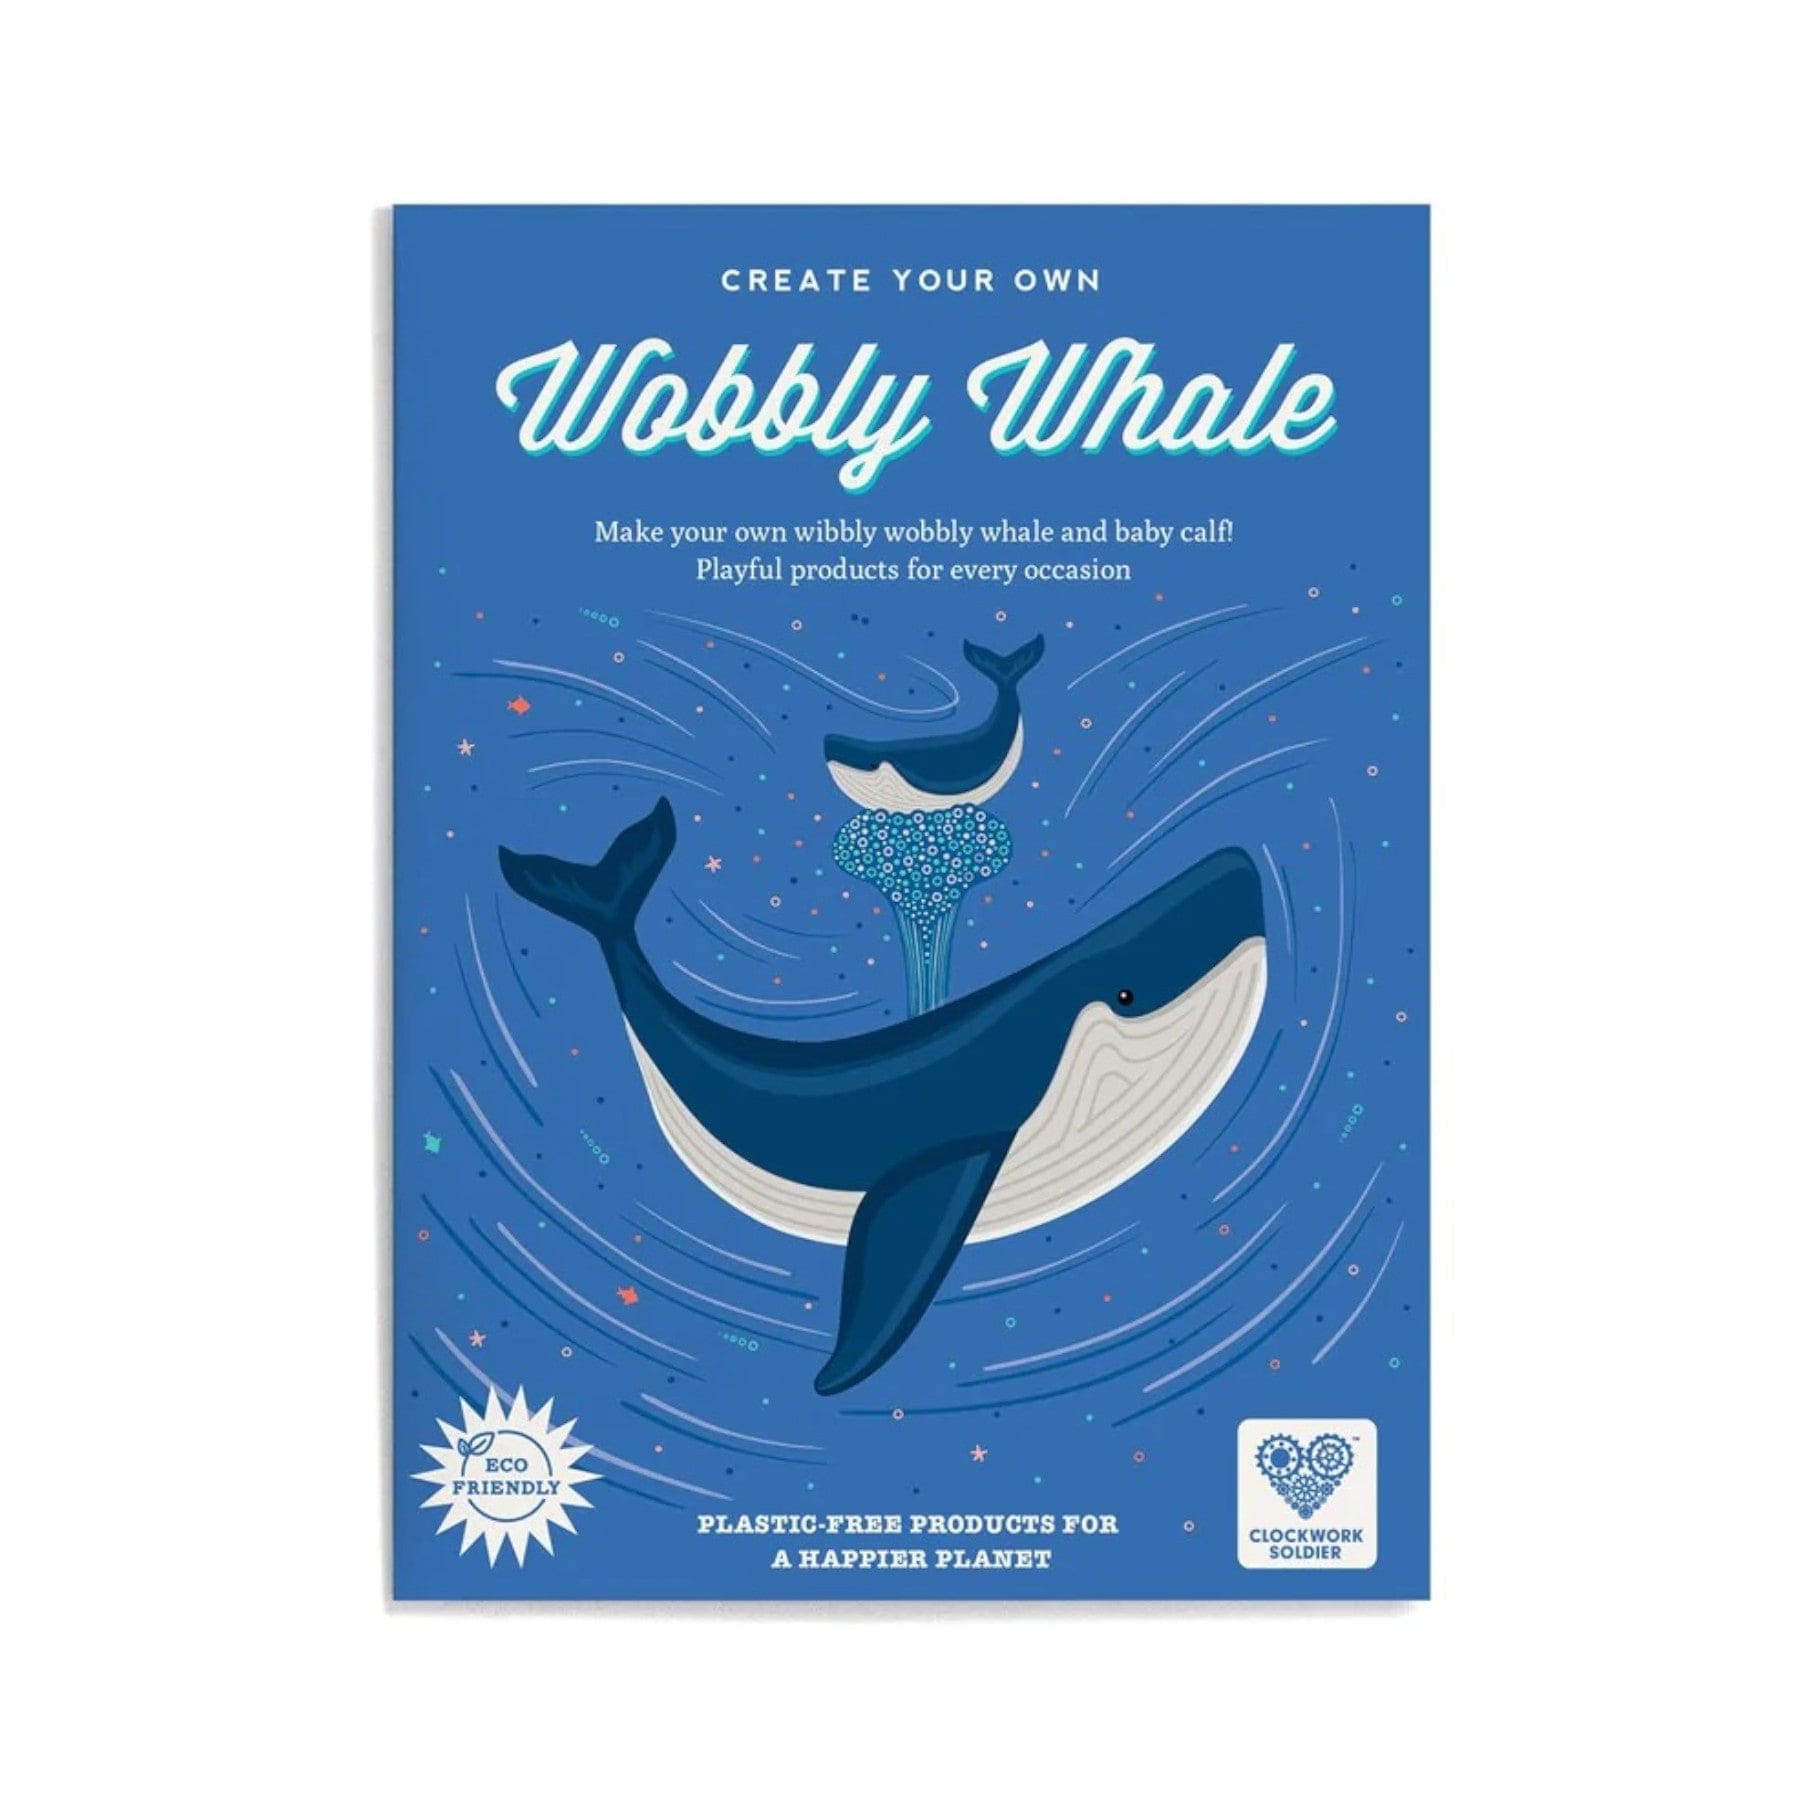 Eco-friendly Wobbly Whale craft kit packaging with blue whales and environmental message for plastic-free products by Clockwork Soldier.